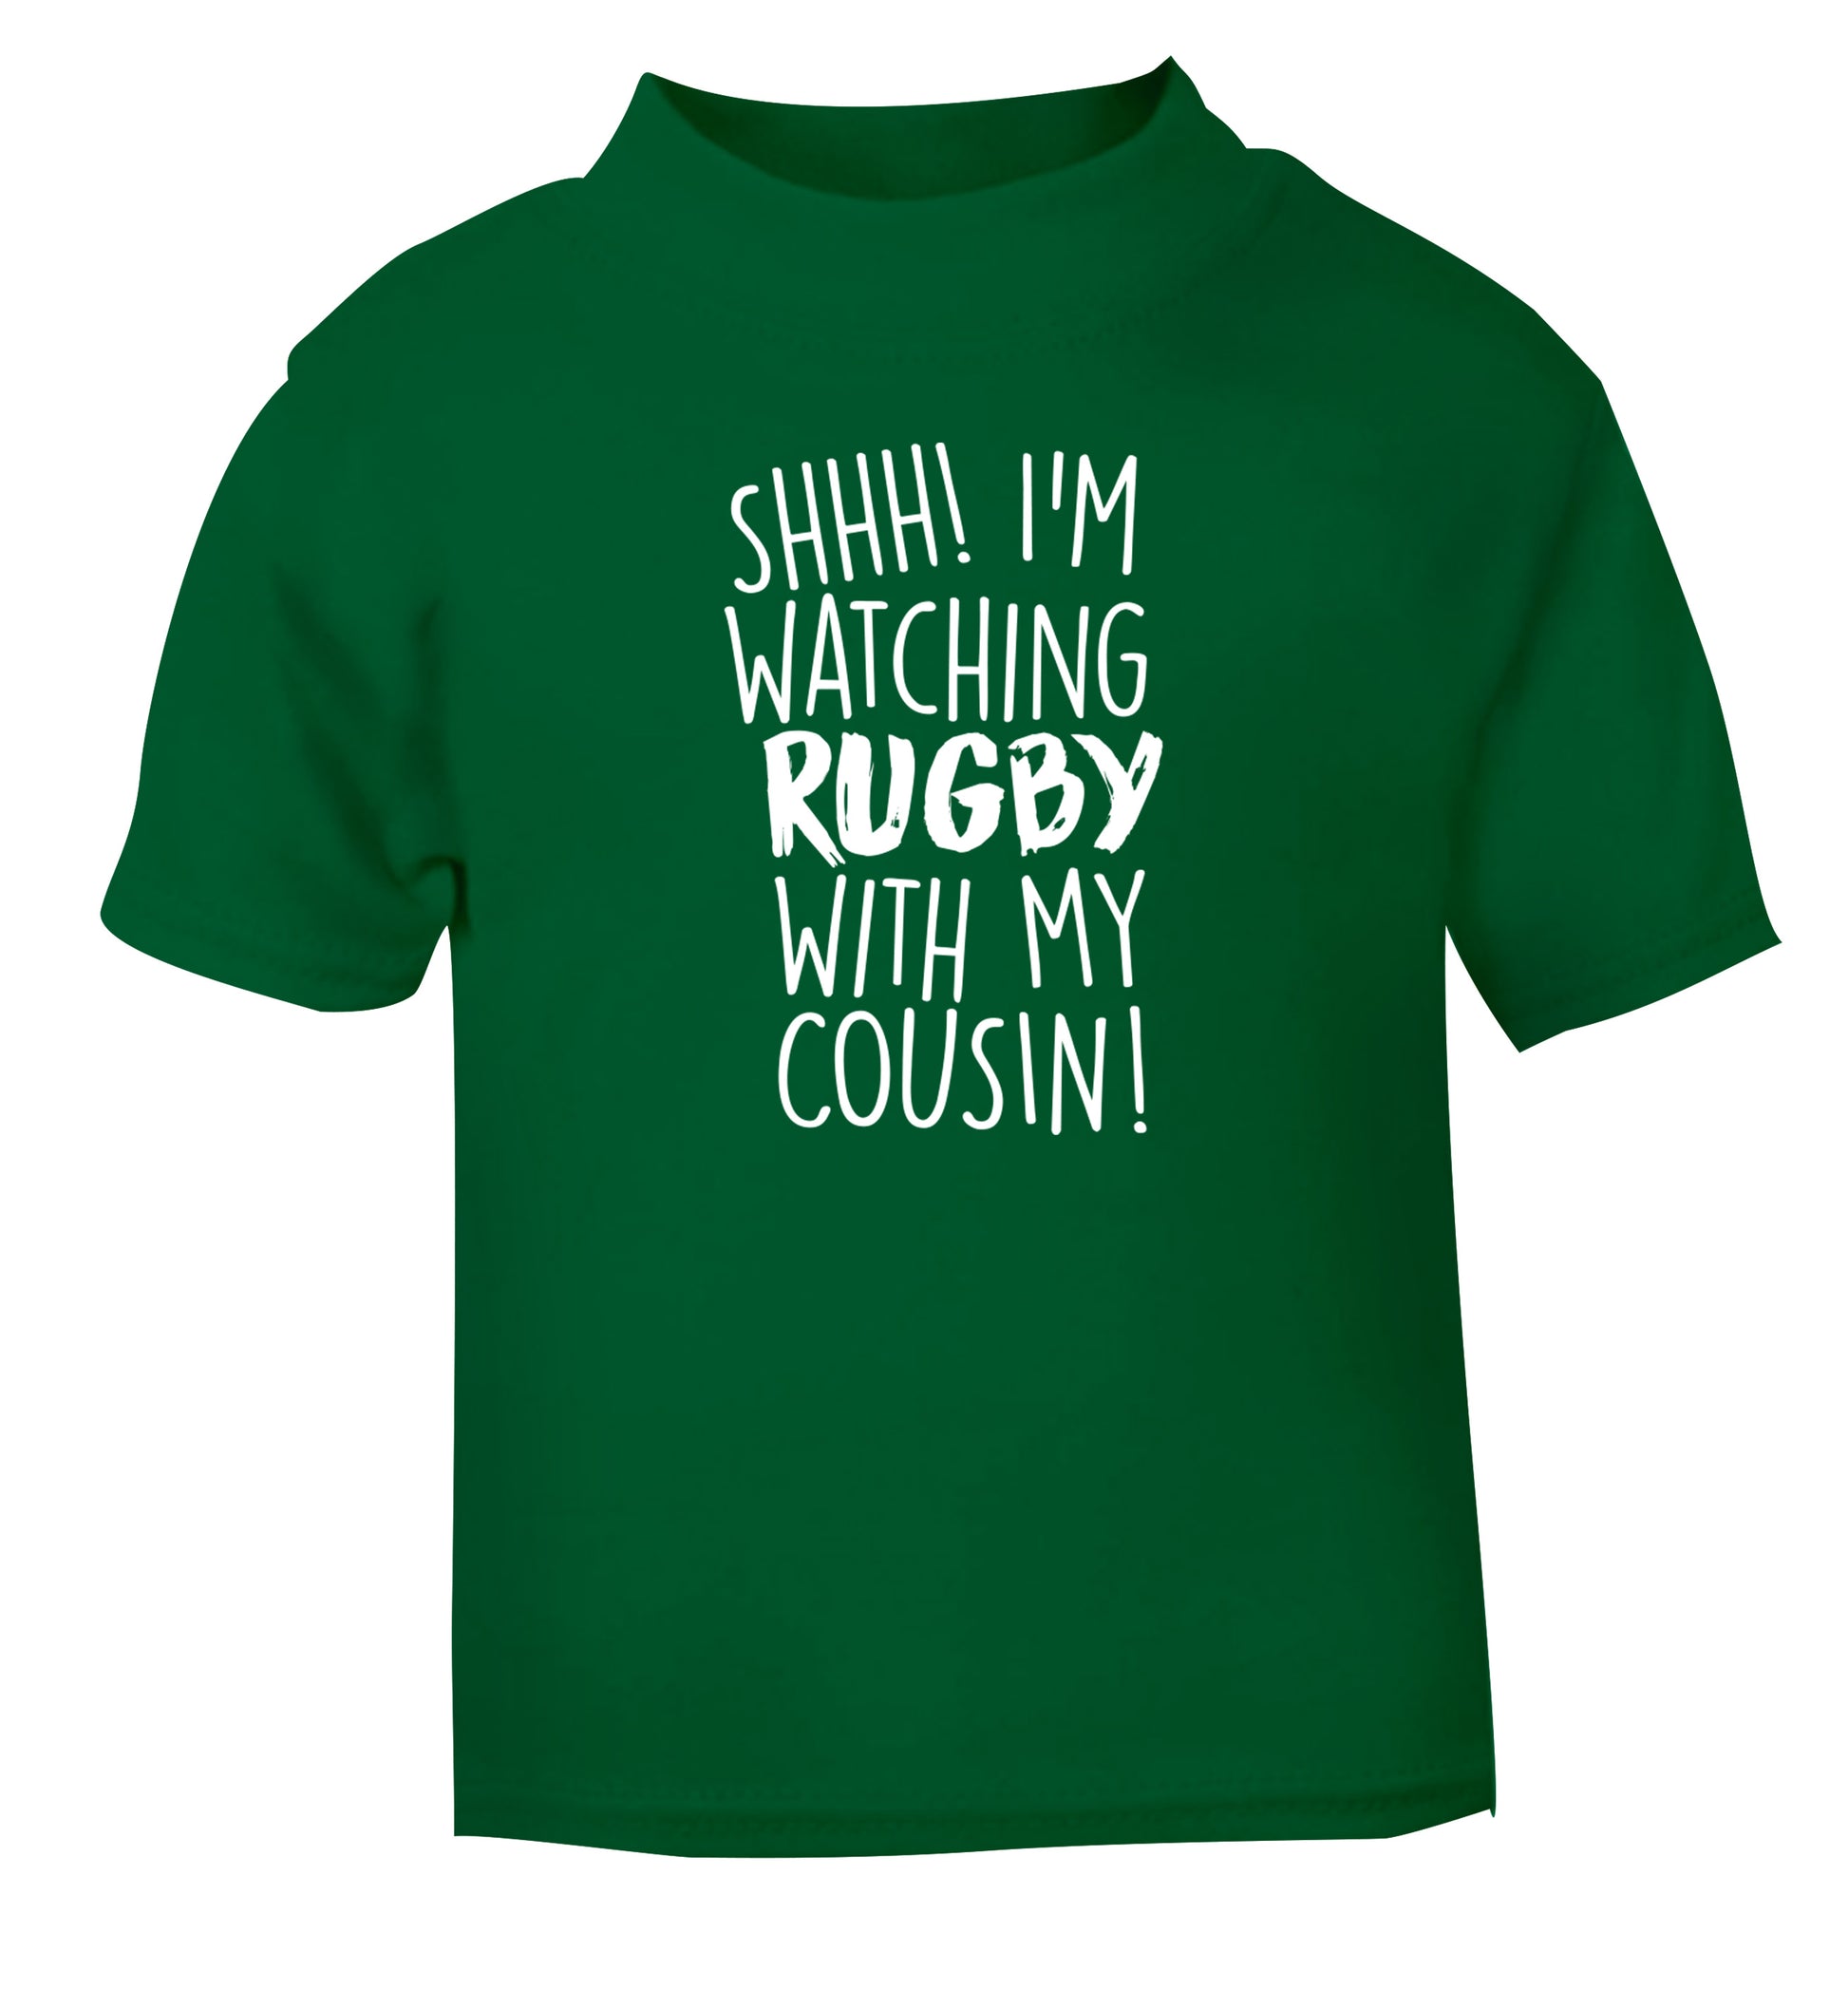 Shhh I'm watching rugby with my cousin green Baby Toddler Tshirt 2 Years